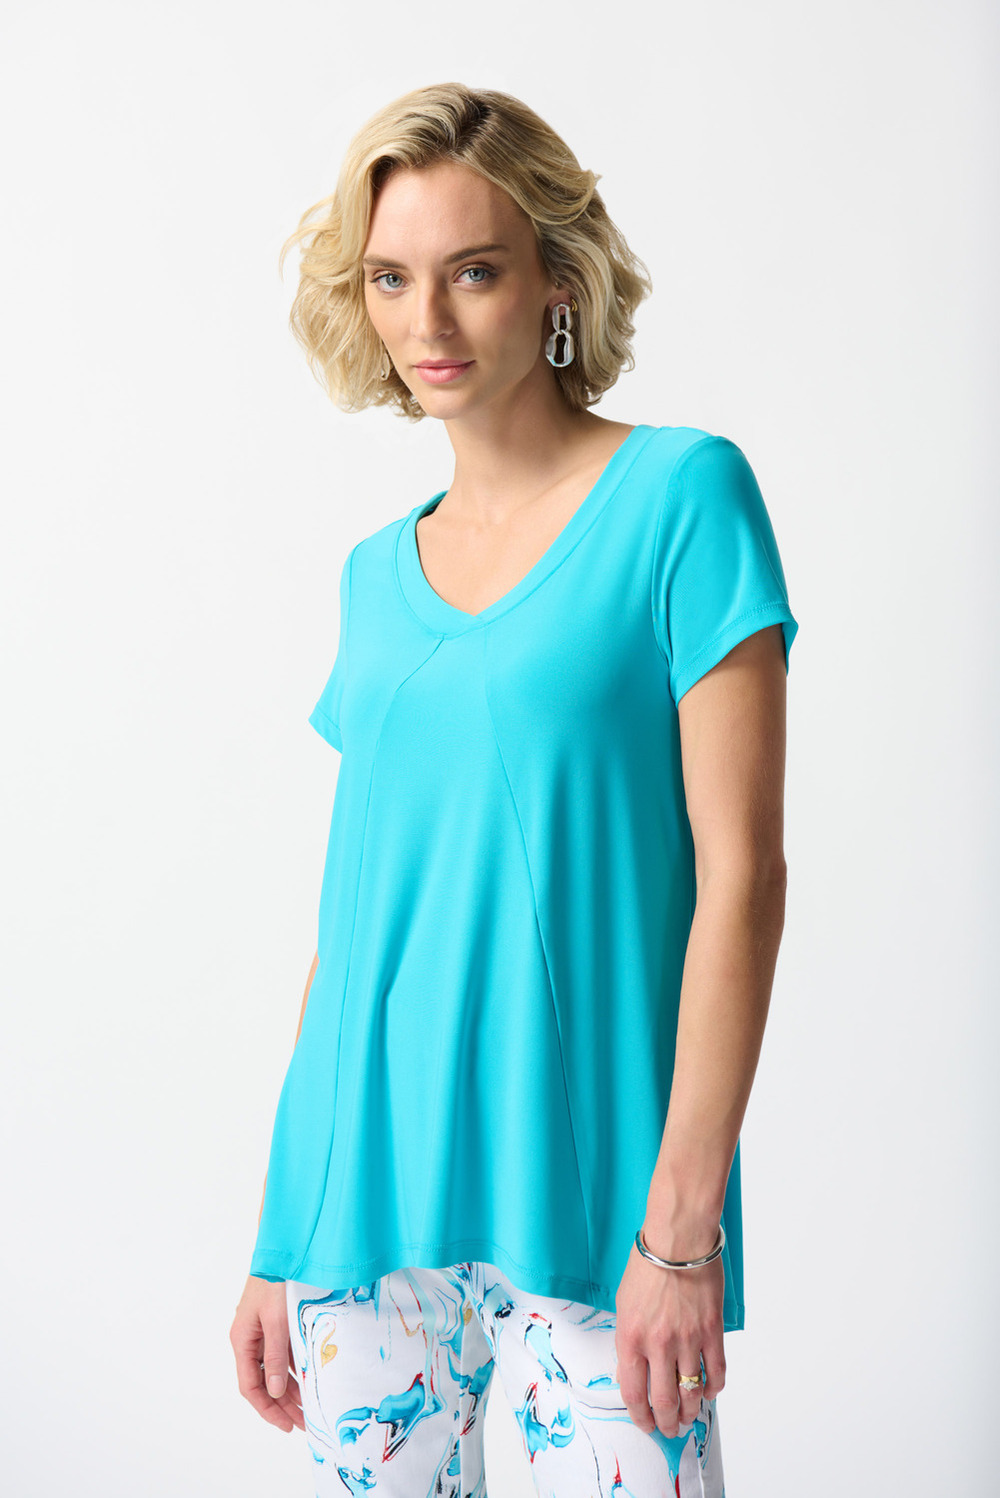 Loose-Fit V-Neck Top Style 242087. Seaview